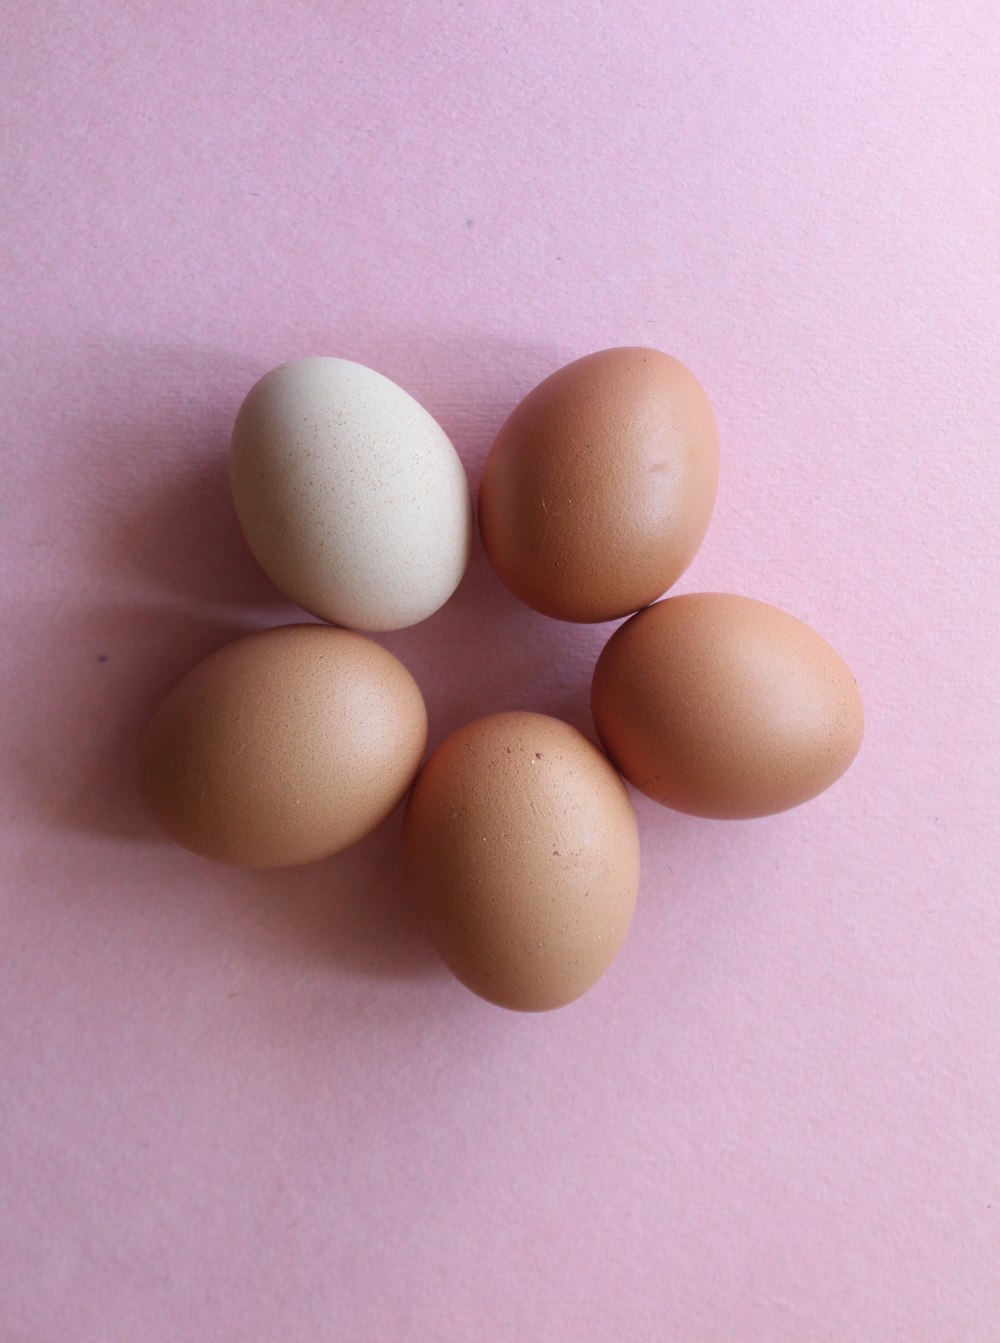 2 brown eggs on pink textile